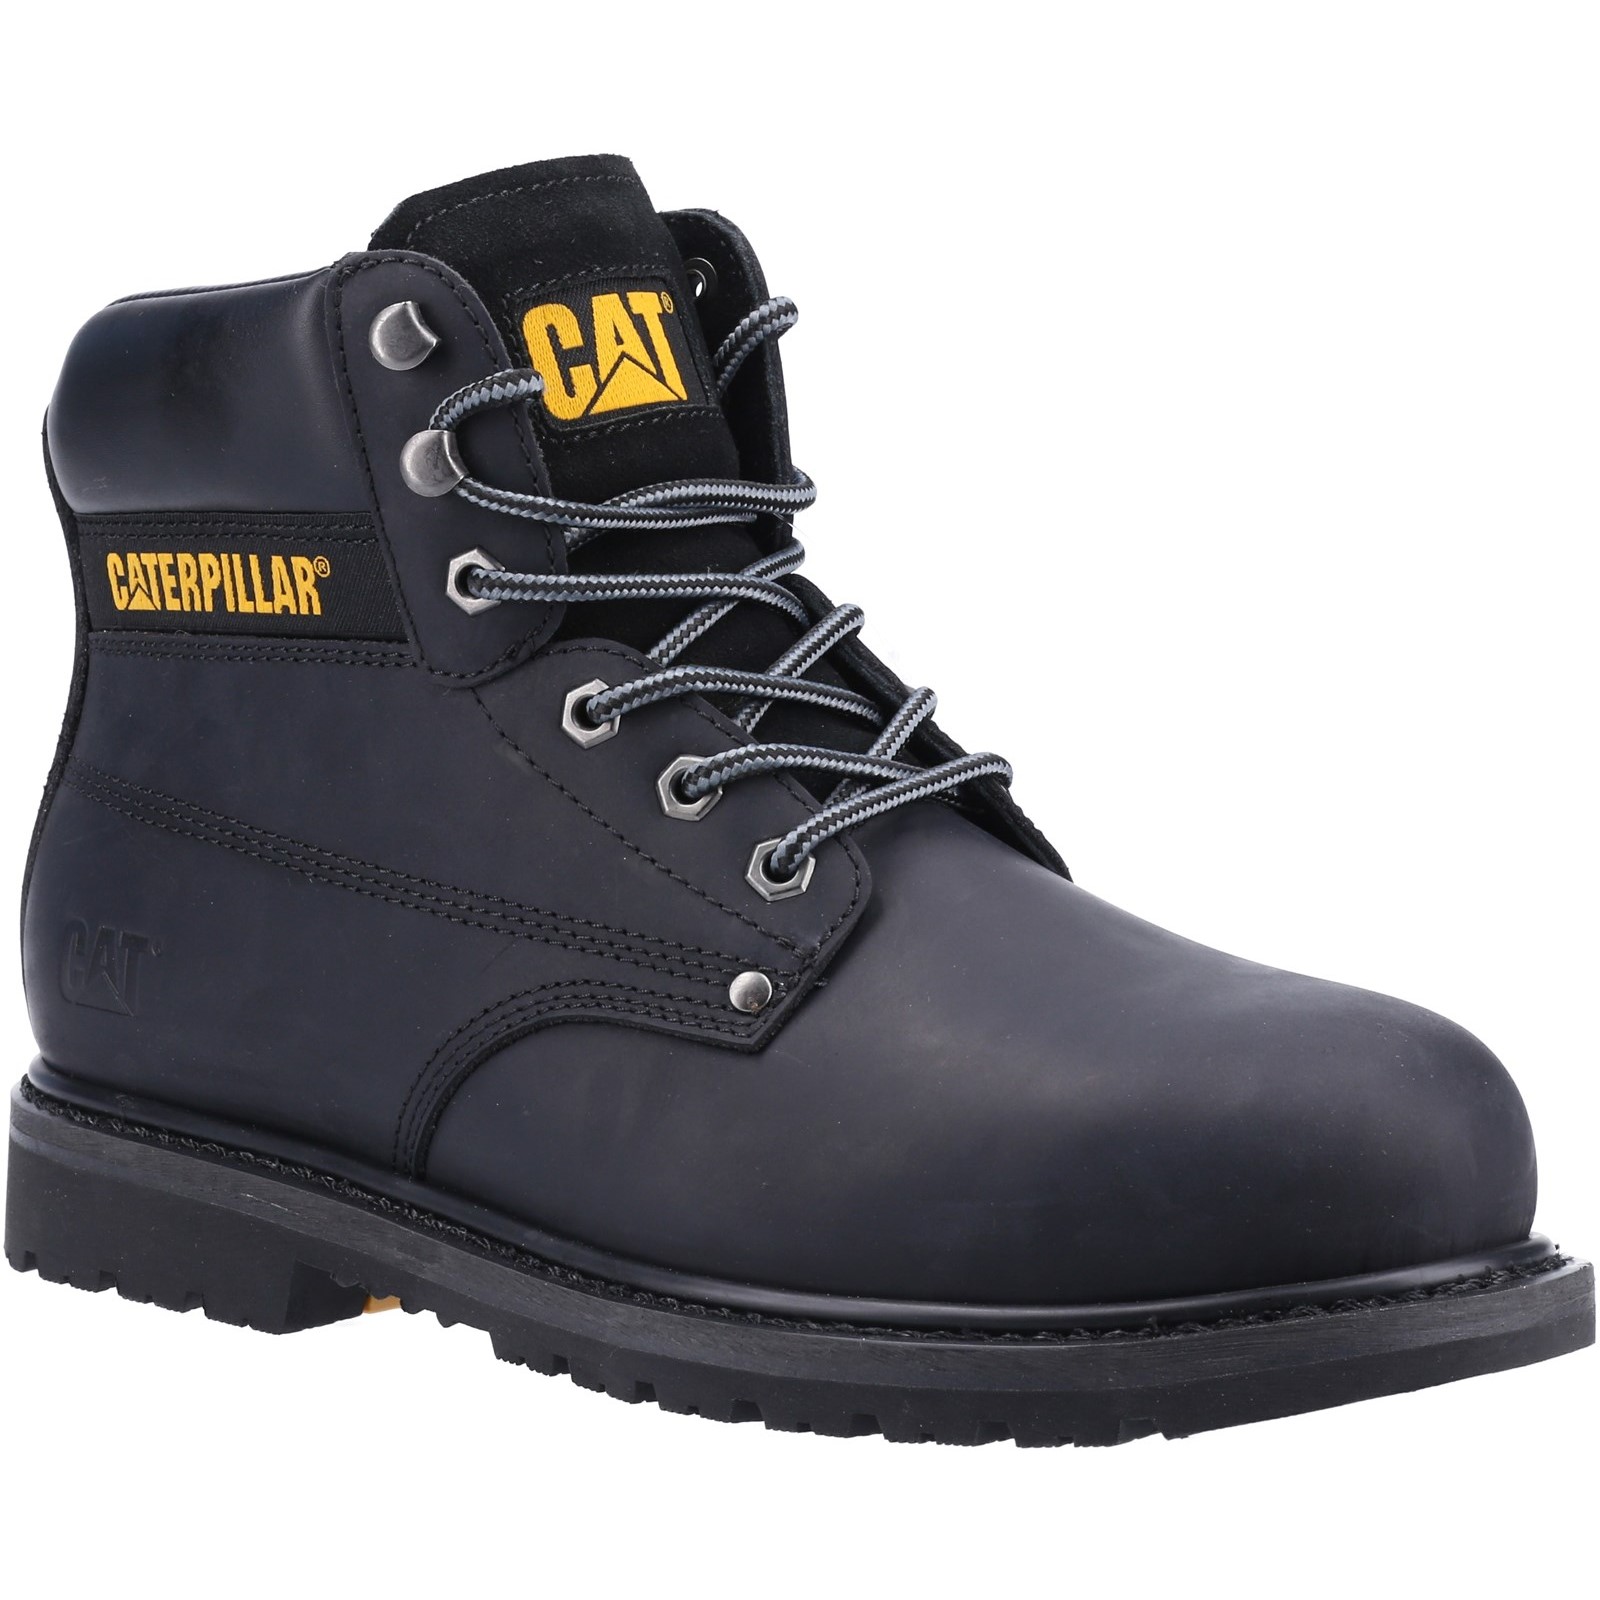 Powerplant S3 GYW Safety Boot